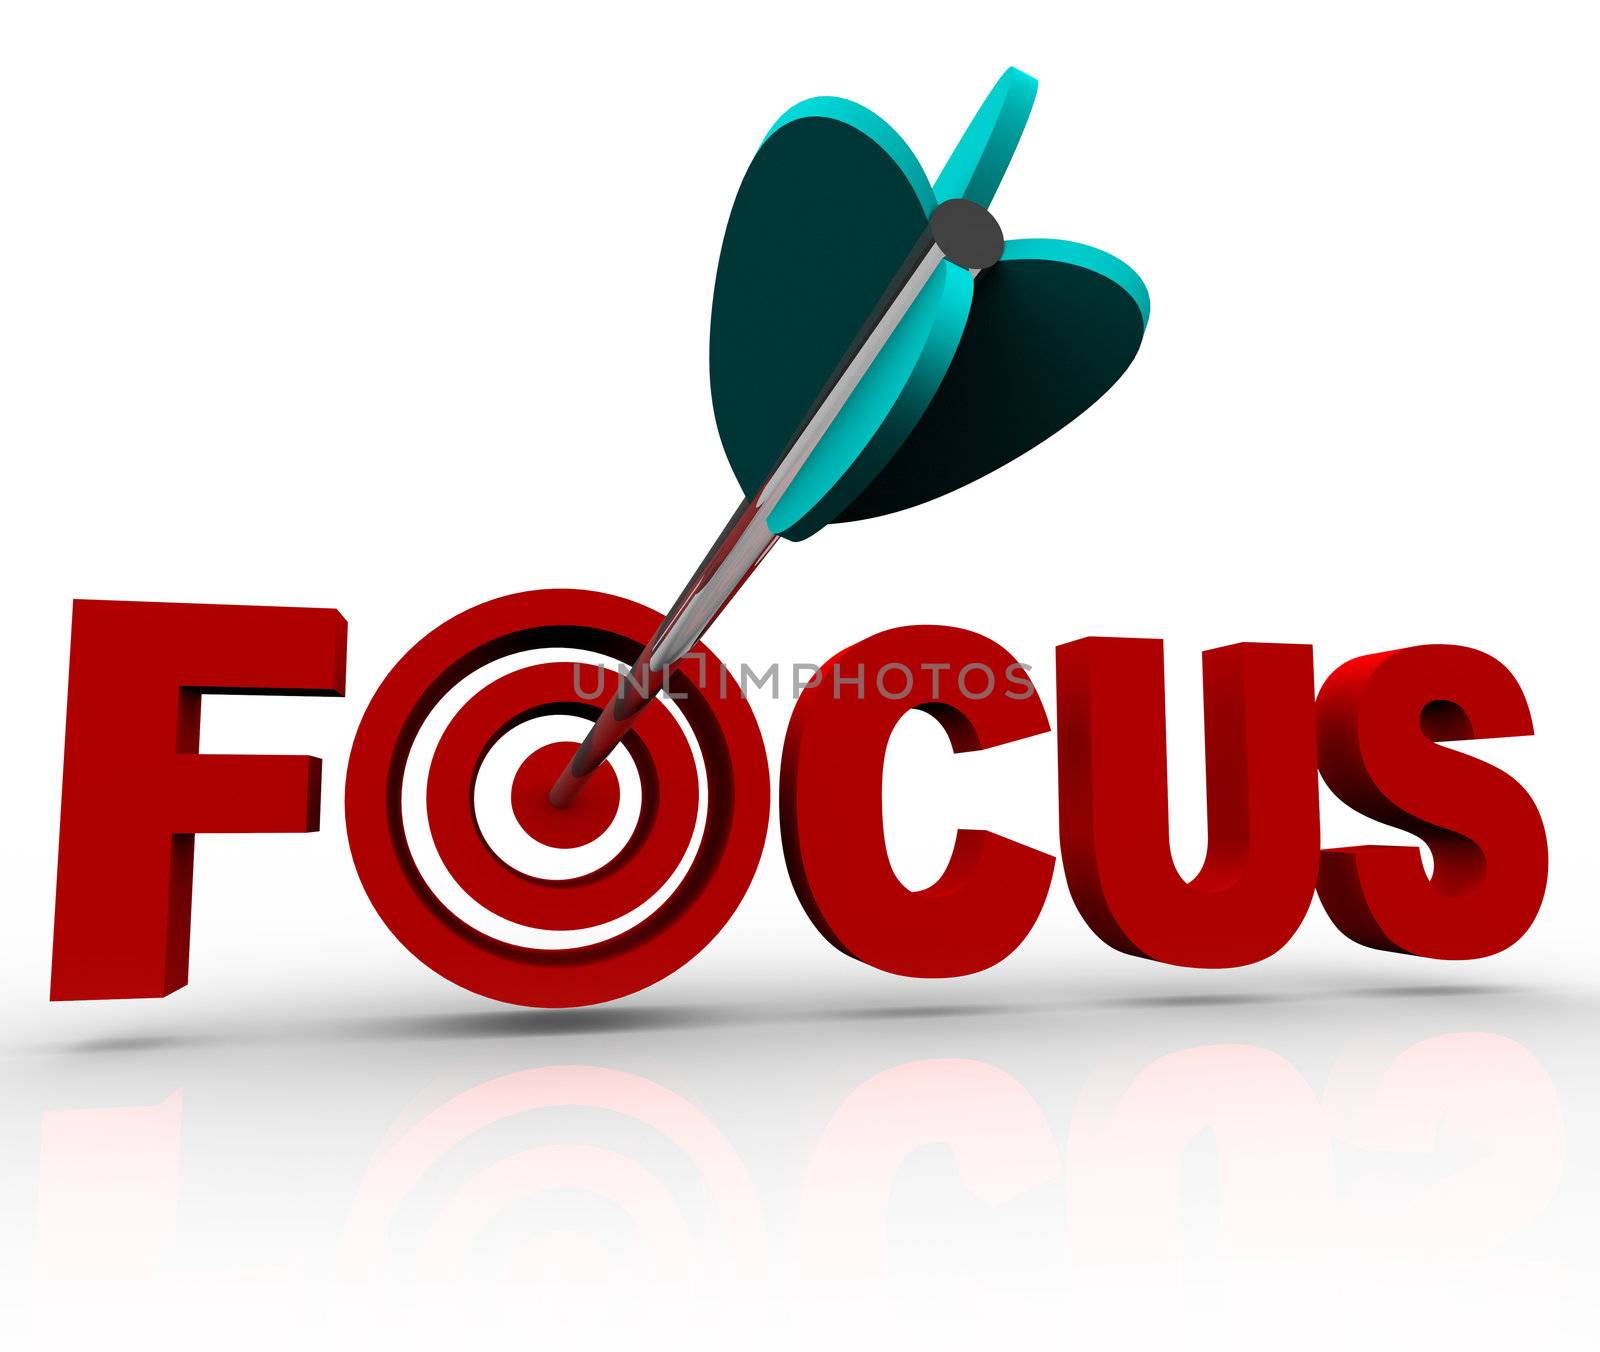 An arrow makes a direct hit in the bulls-eye target in the word Focus, illustrating the importance of focusing and aiming at your goal